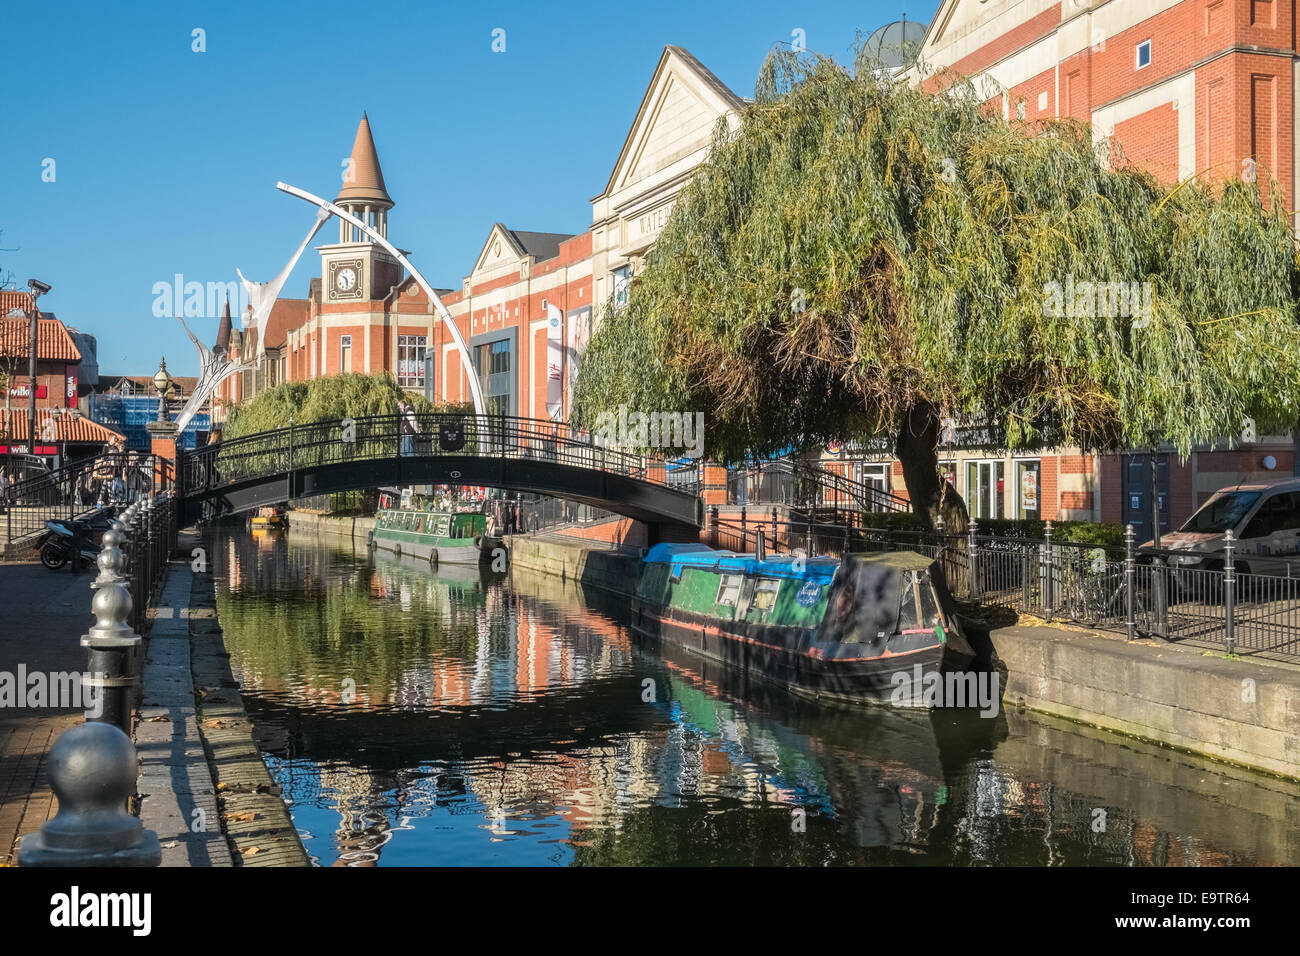 Waterside shopping centre area, Lincoln, UK Stock Photo